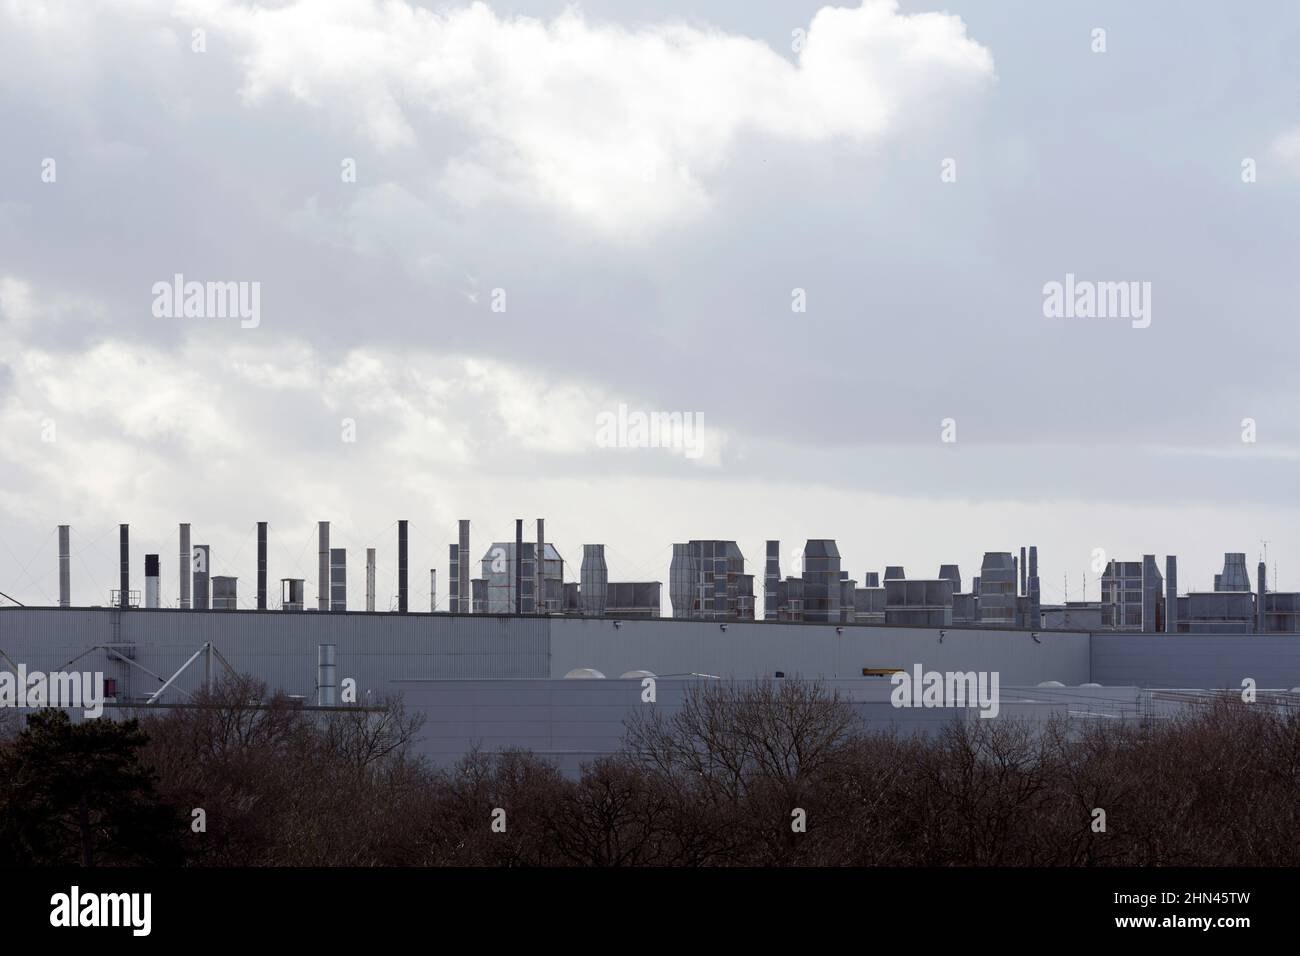 View towards Jaguar Land Rover factory from Elmdon Park in winter, West Midlands, England, UK Stock Photo